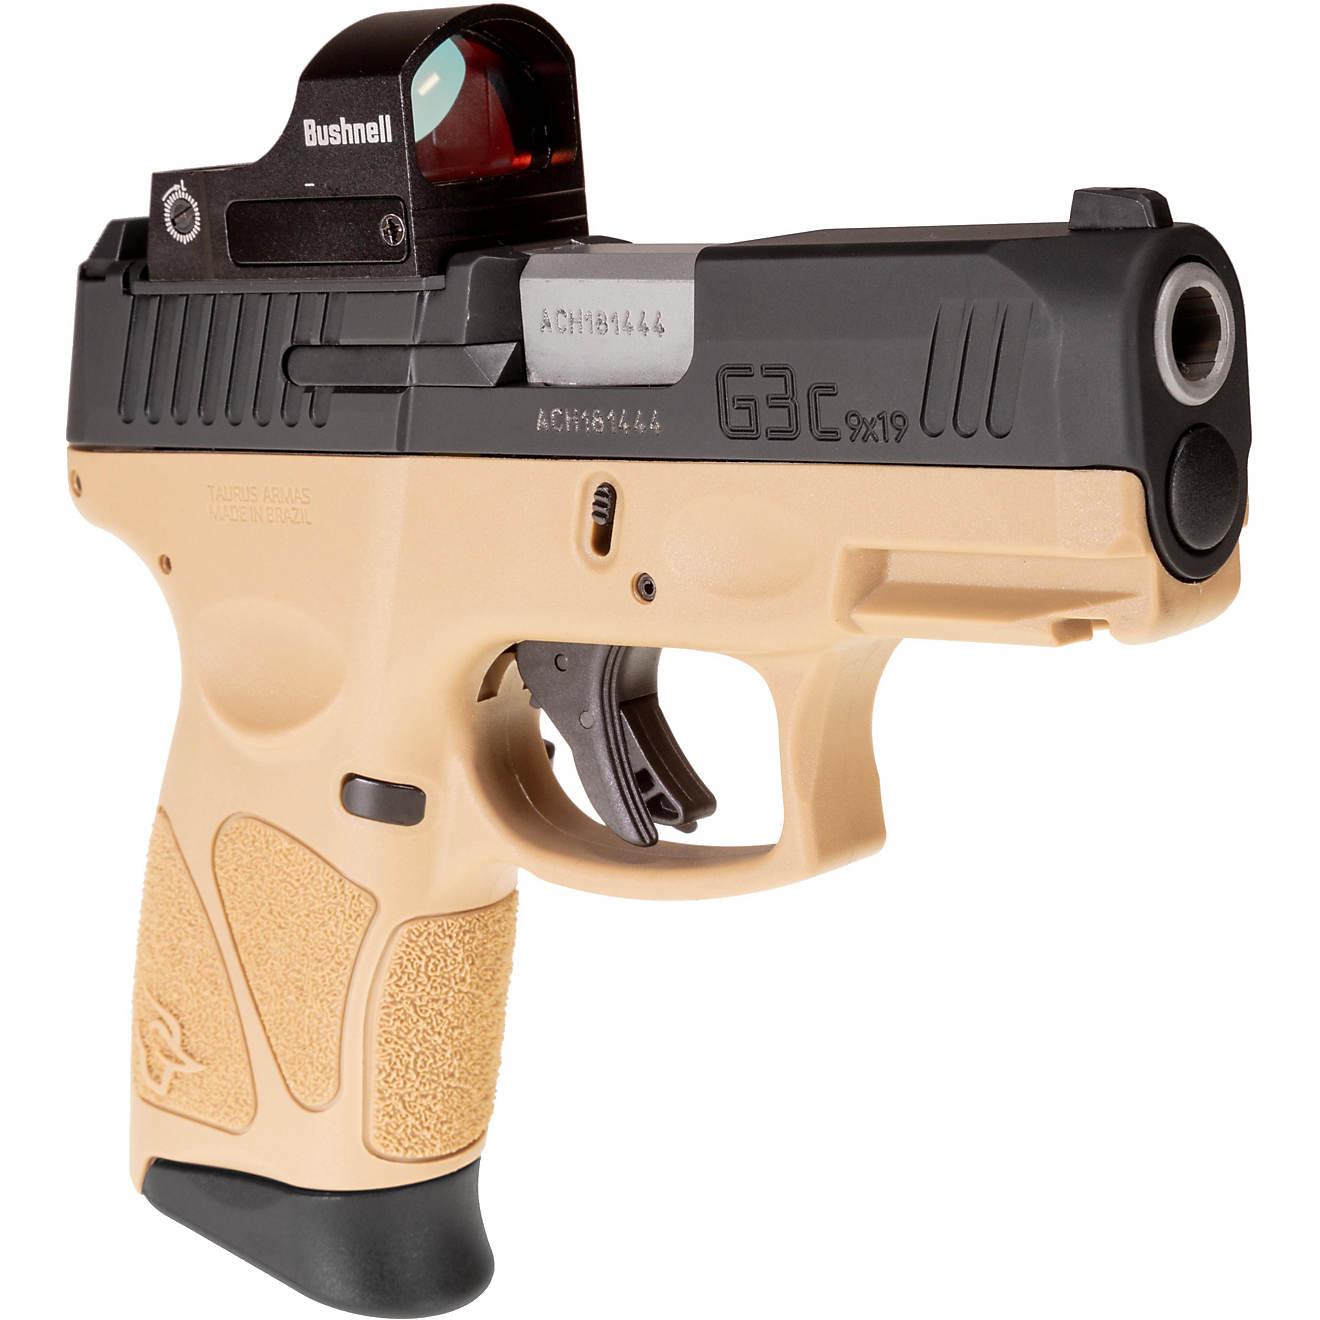 Taurus G3C T.O.R.O. 9mm Tan/Black Centerfire Pistol with Red Dot - $399.99 (Free Store Pickup)